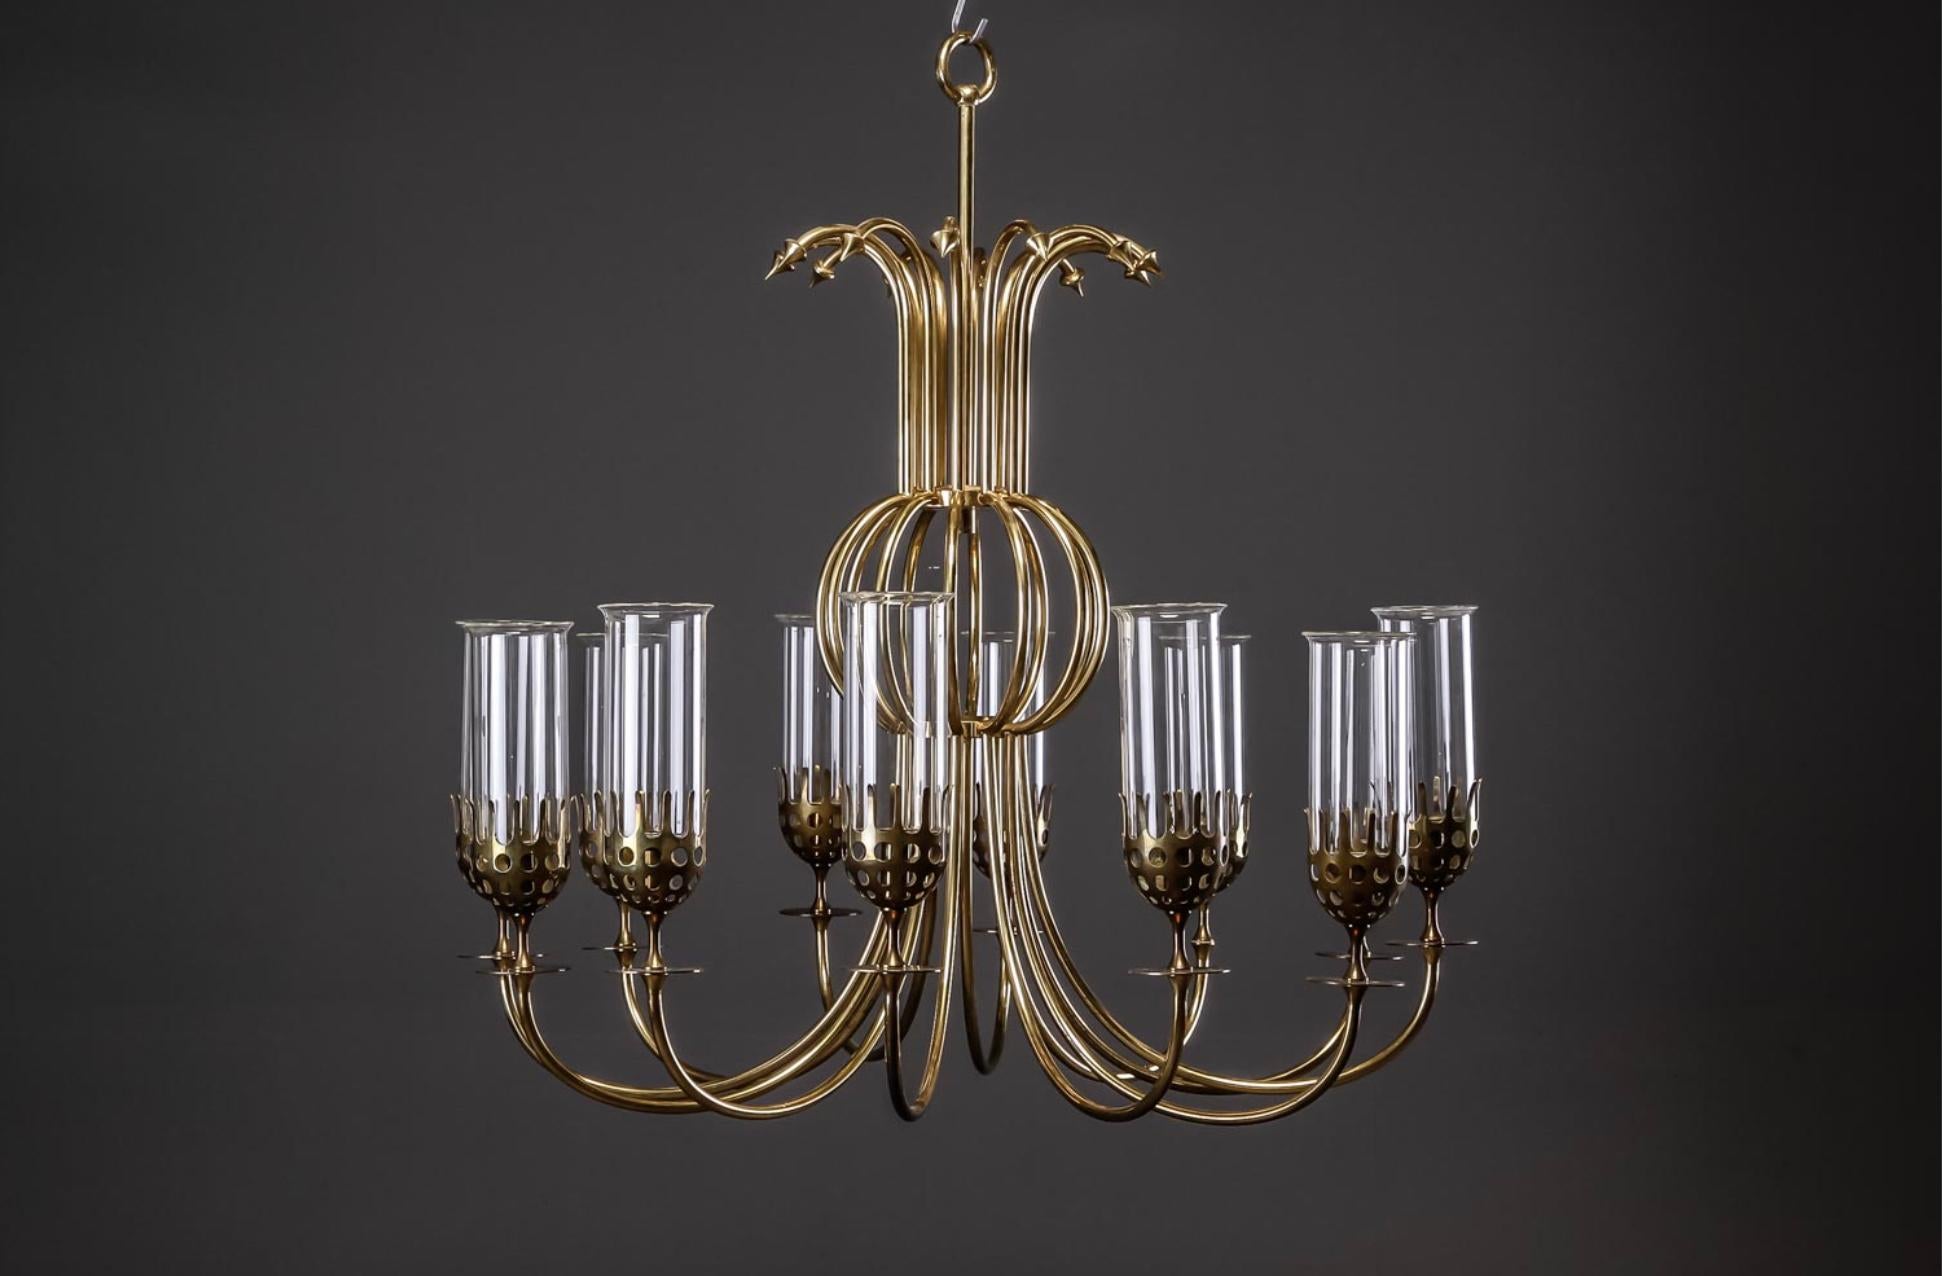 Large chandelier with twelve arms for candles. Designed by Bjørn Wiinblad, Denmark circa 1970.
Electrification available upon request.